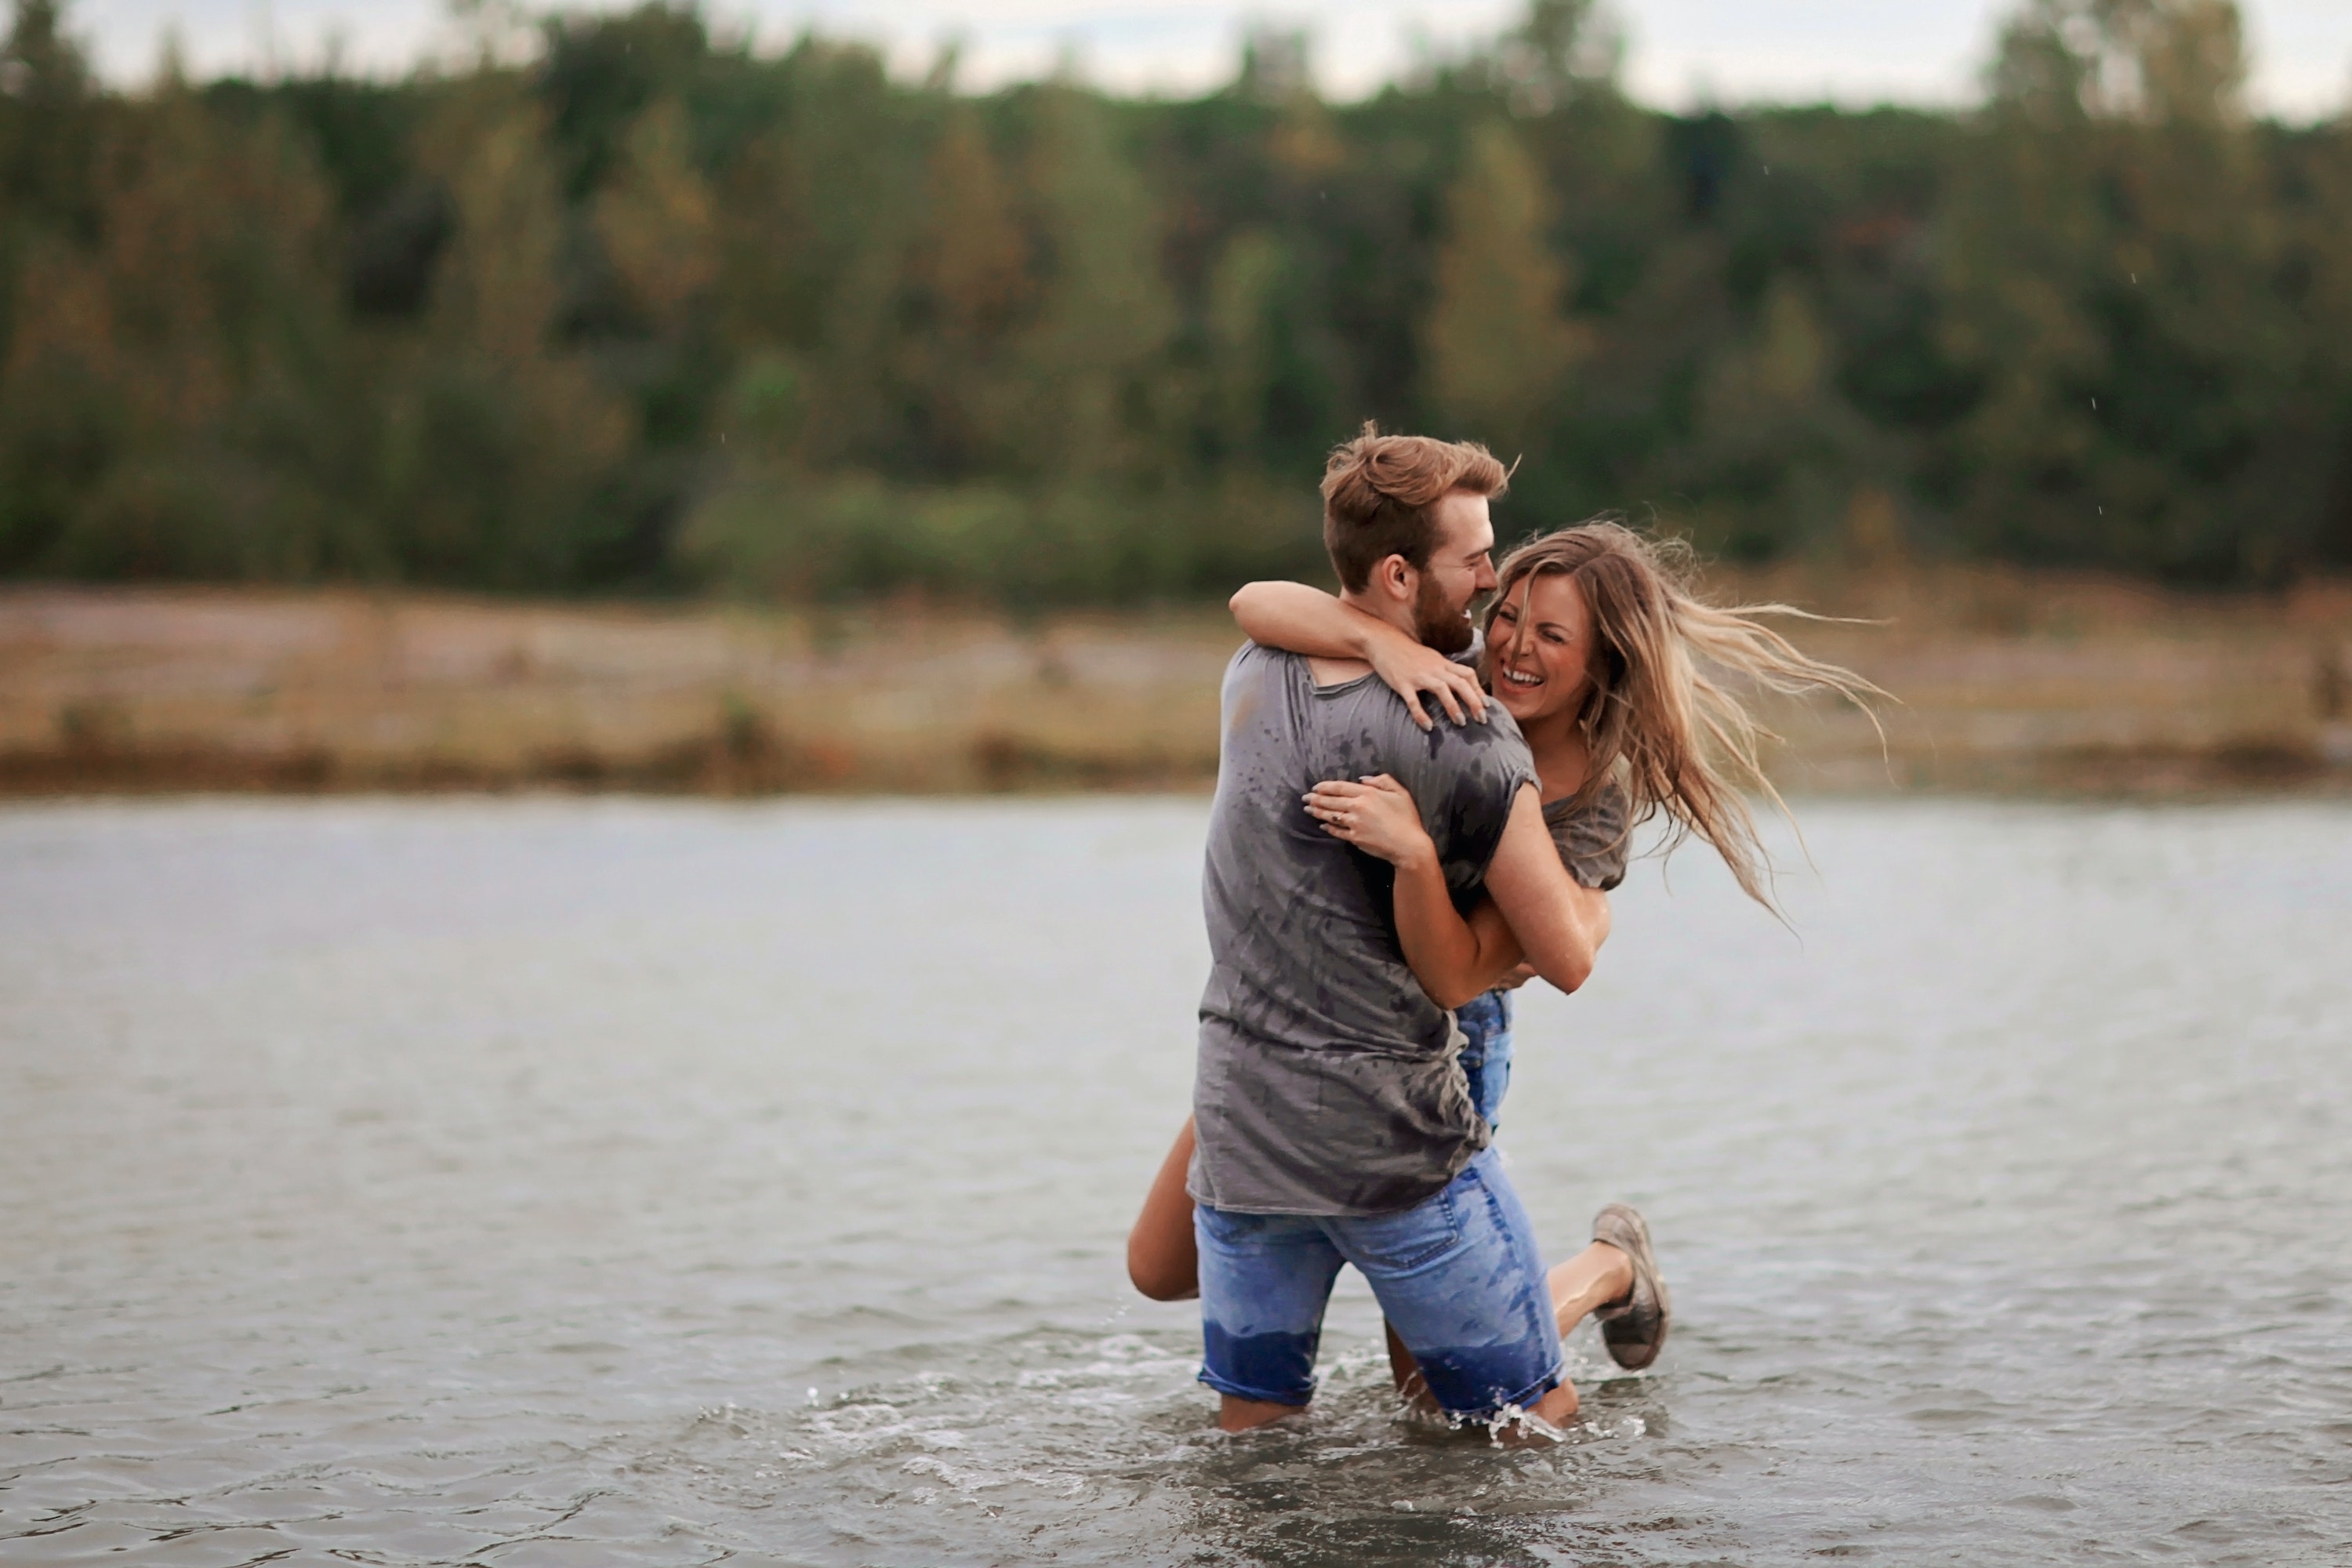 Couple playing in the water. | Source: Pexels